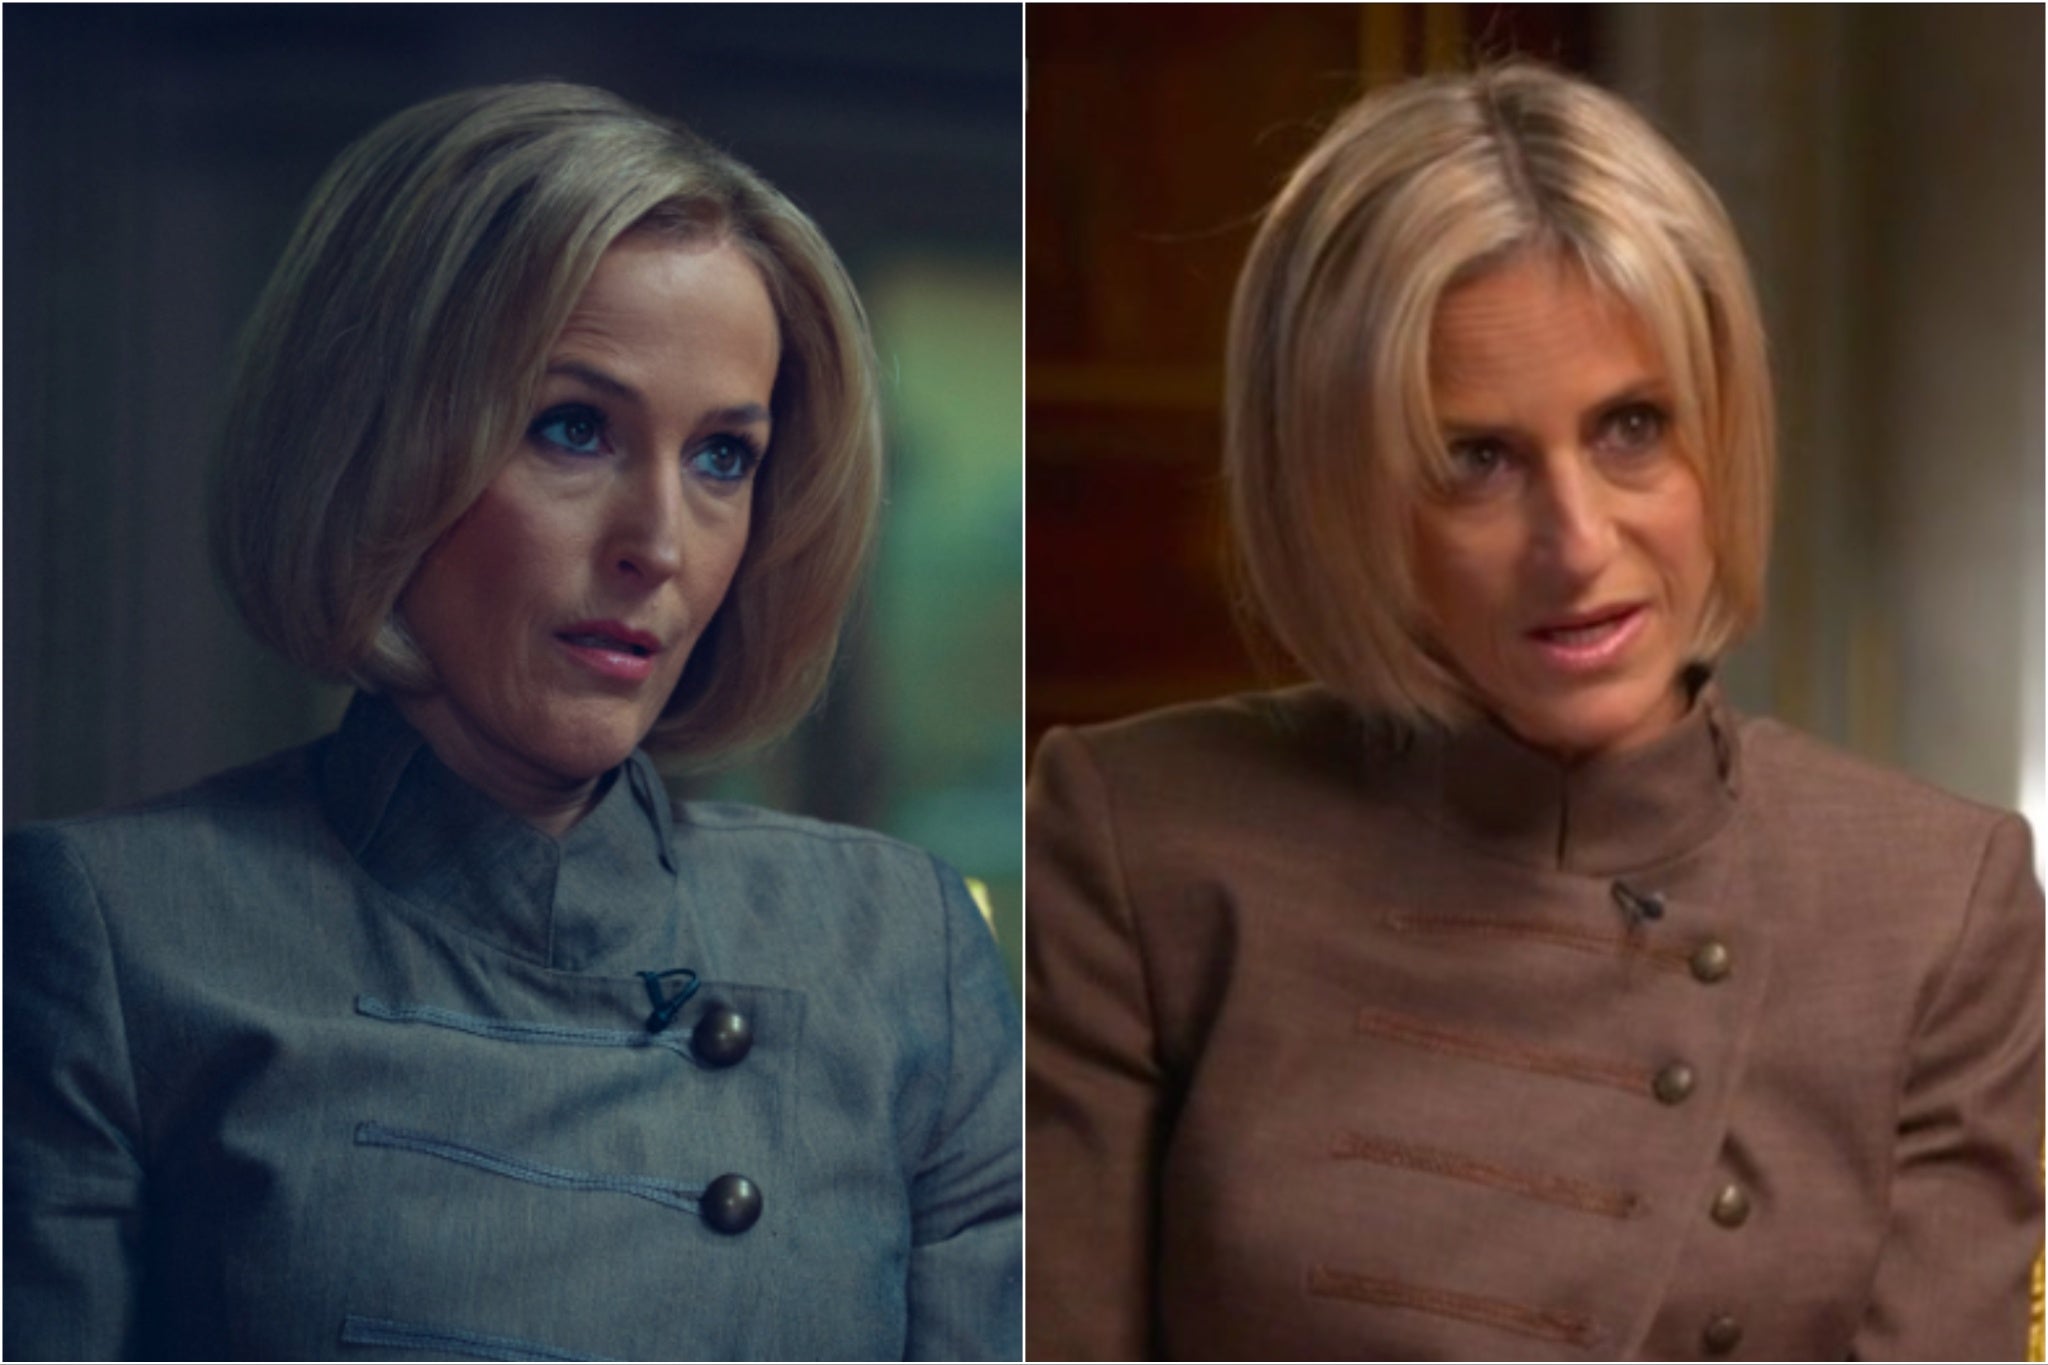 Gillian Anderson as Emily Maitlis in ‘Scoop’, alongside Maitlis during the Newsnight interview